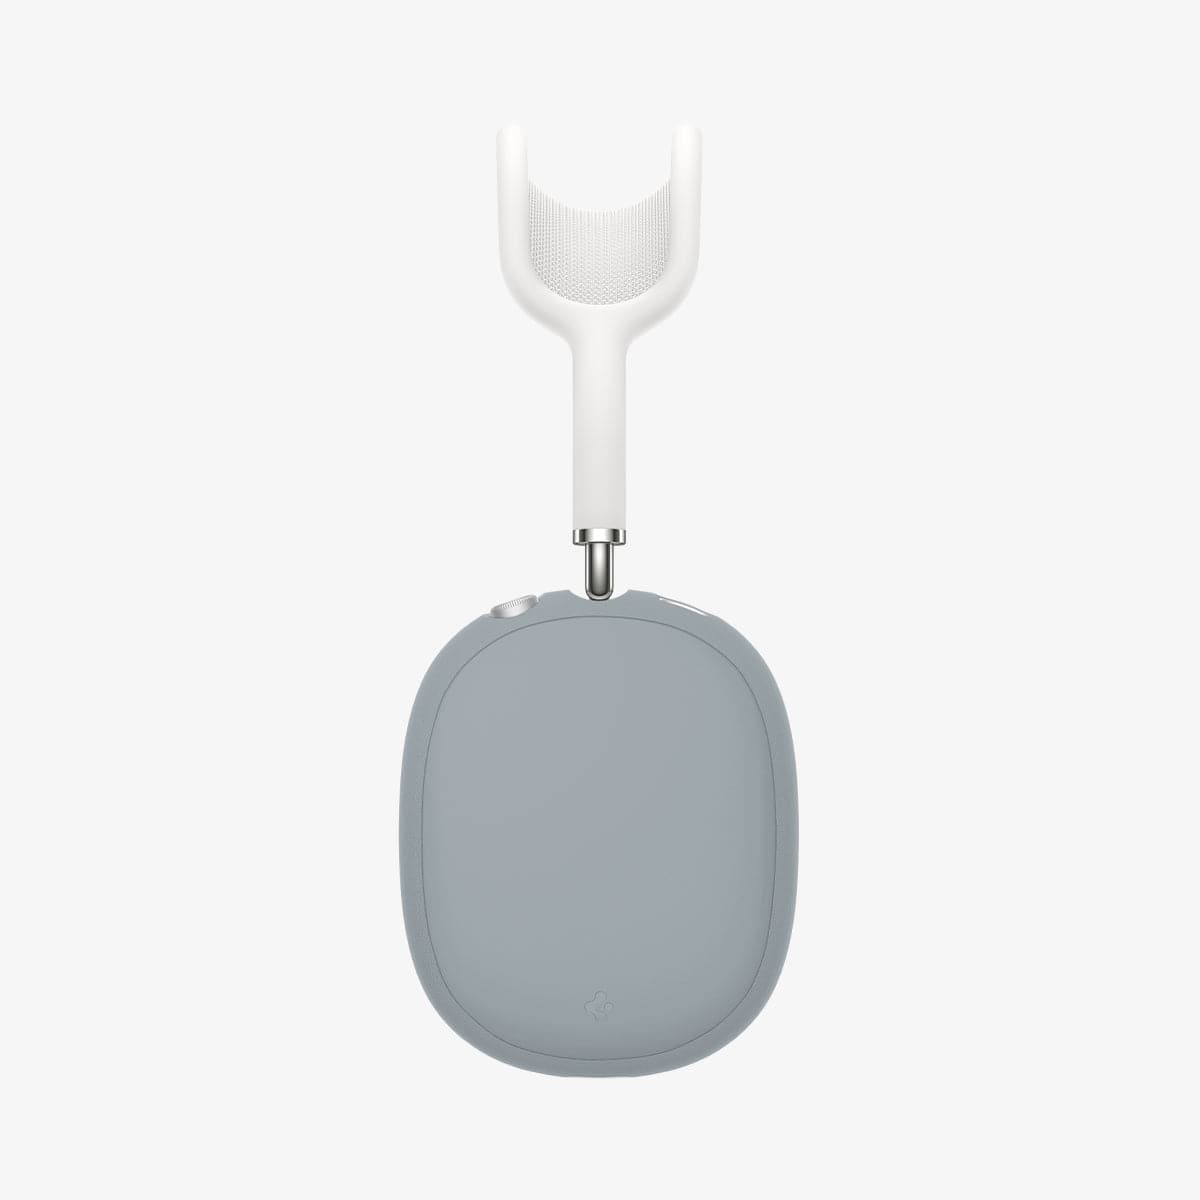 ASD02812 - AirPods Max Case Silicone Fit in gray showing the side